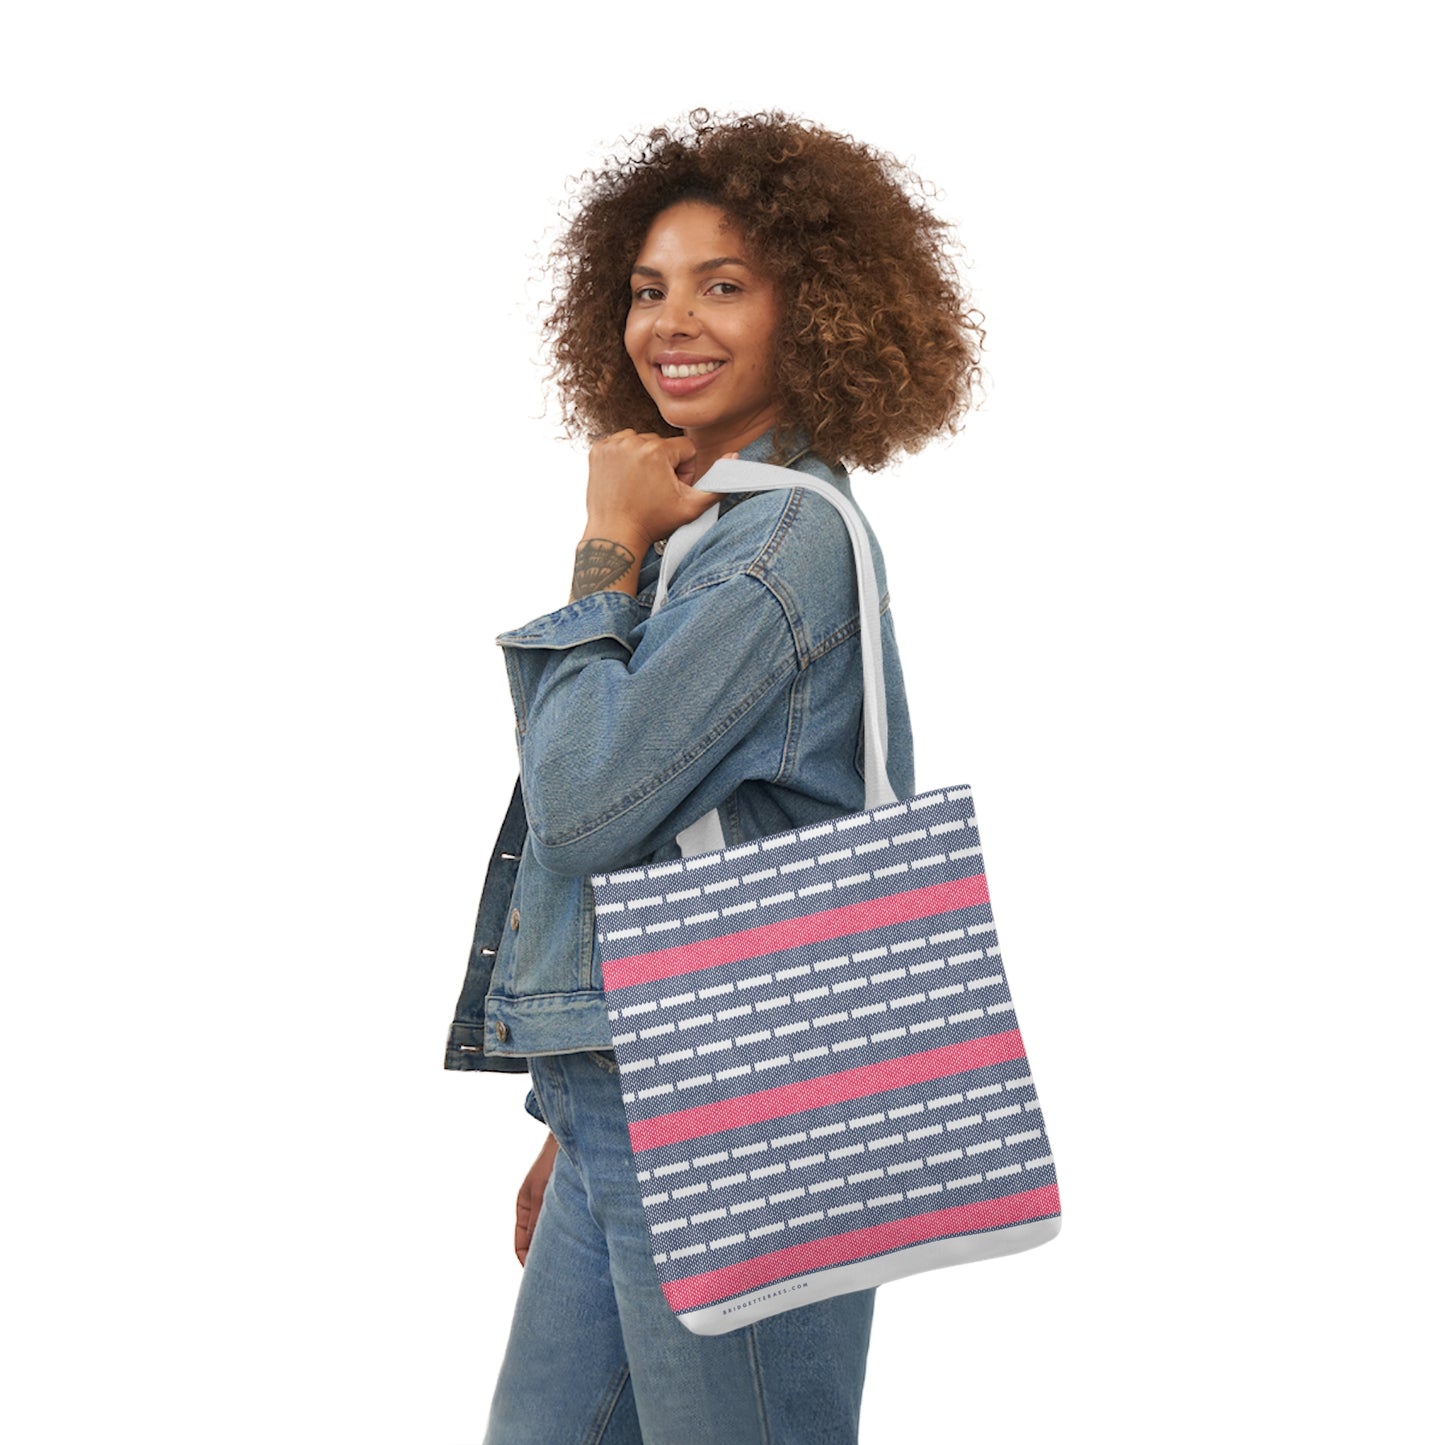 Nautical Knitted Stripe Polyester Canvas Tote Bag